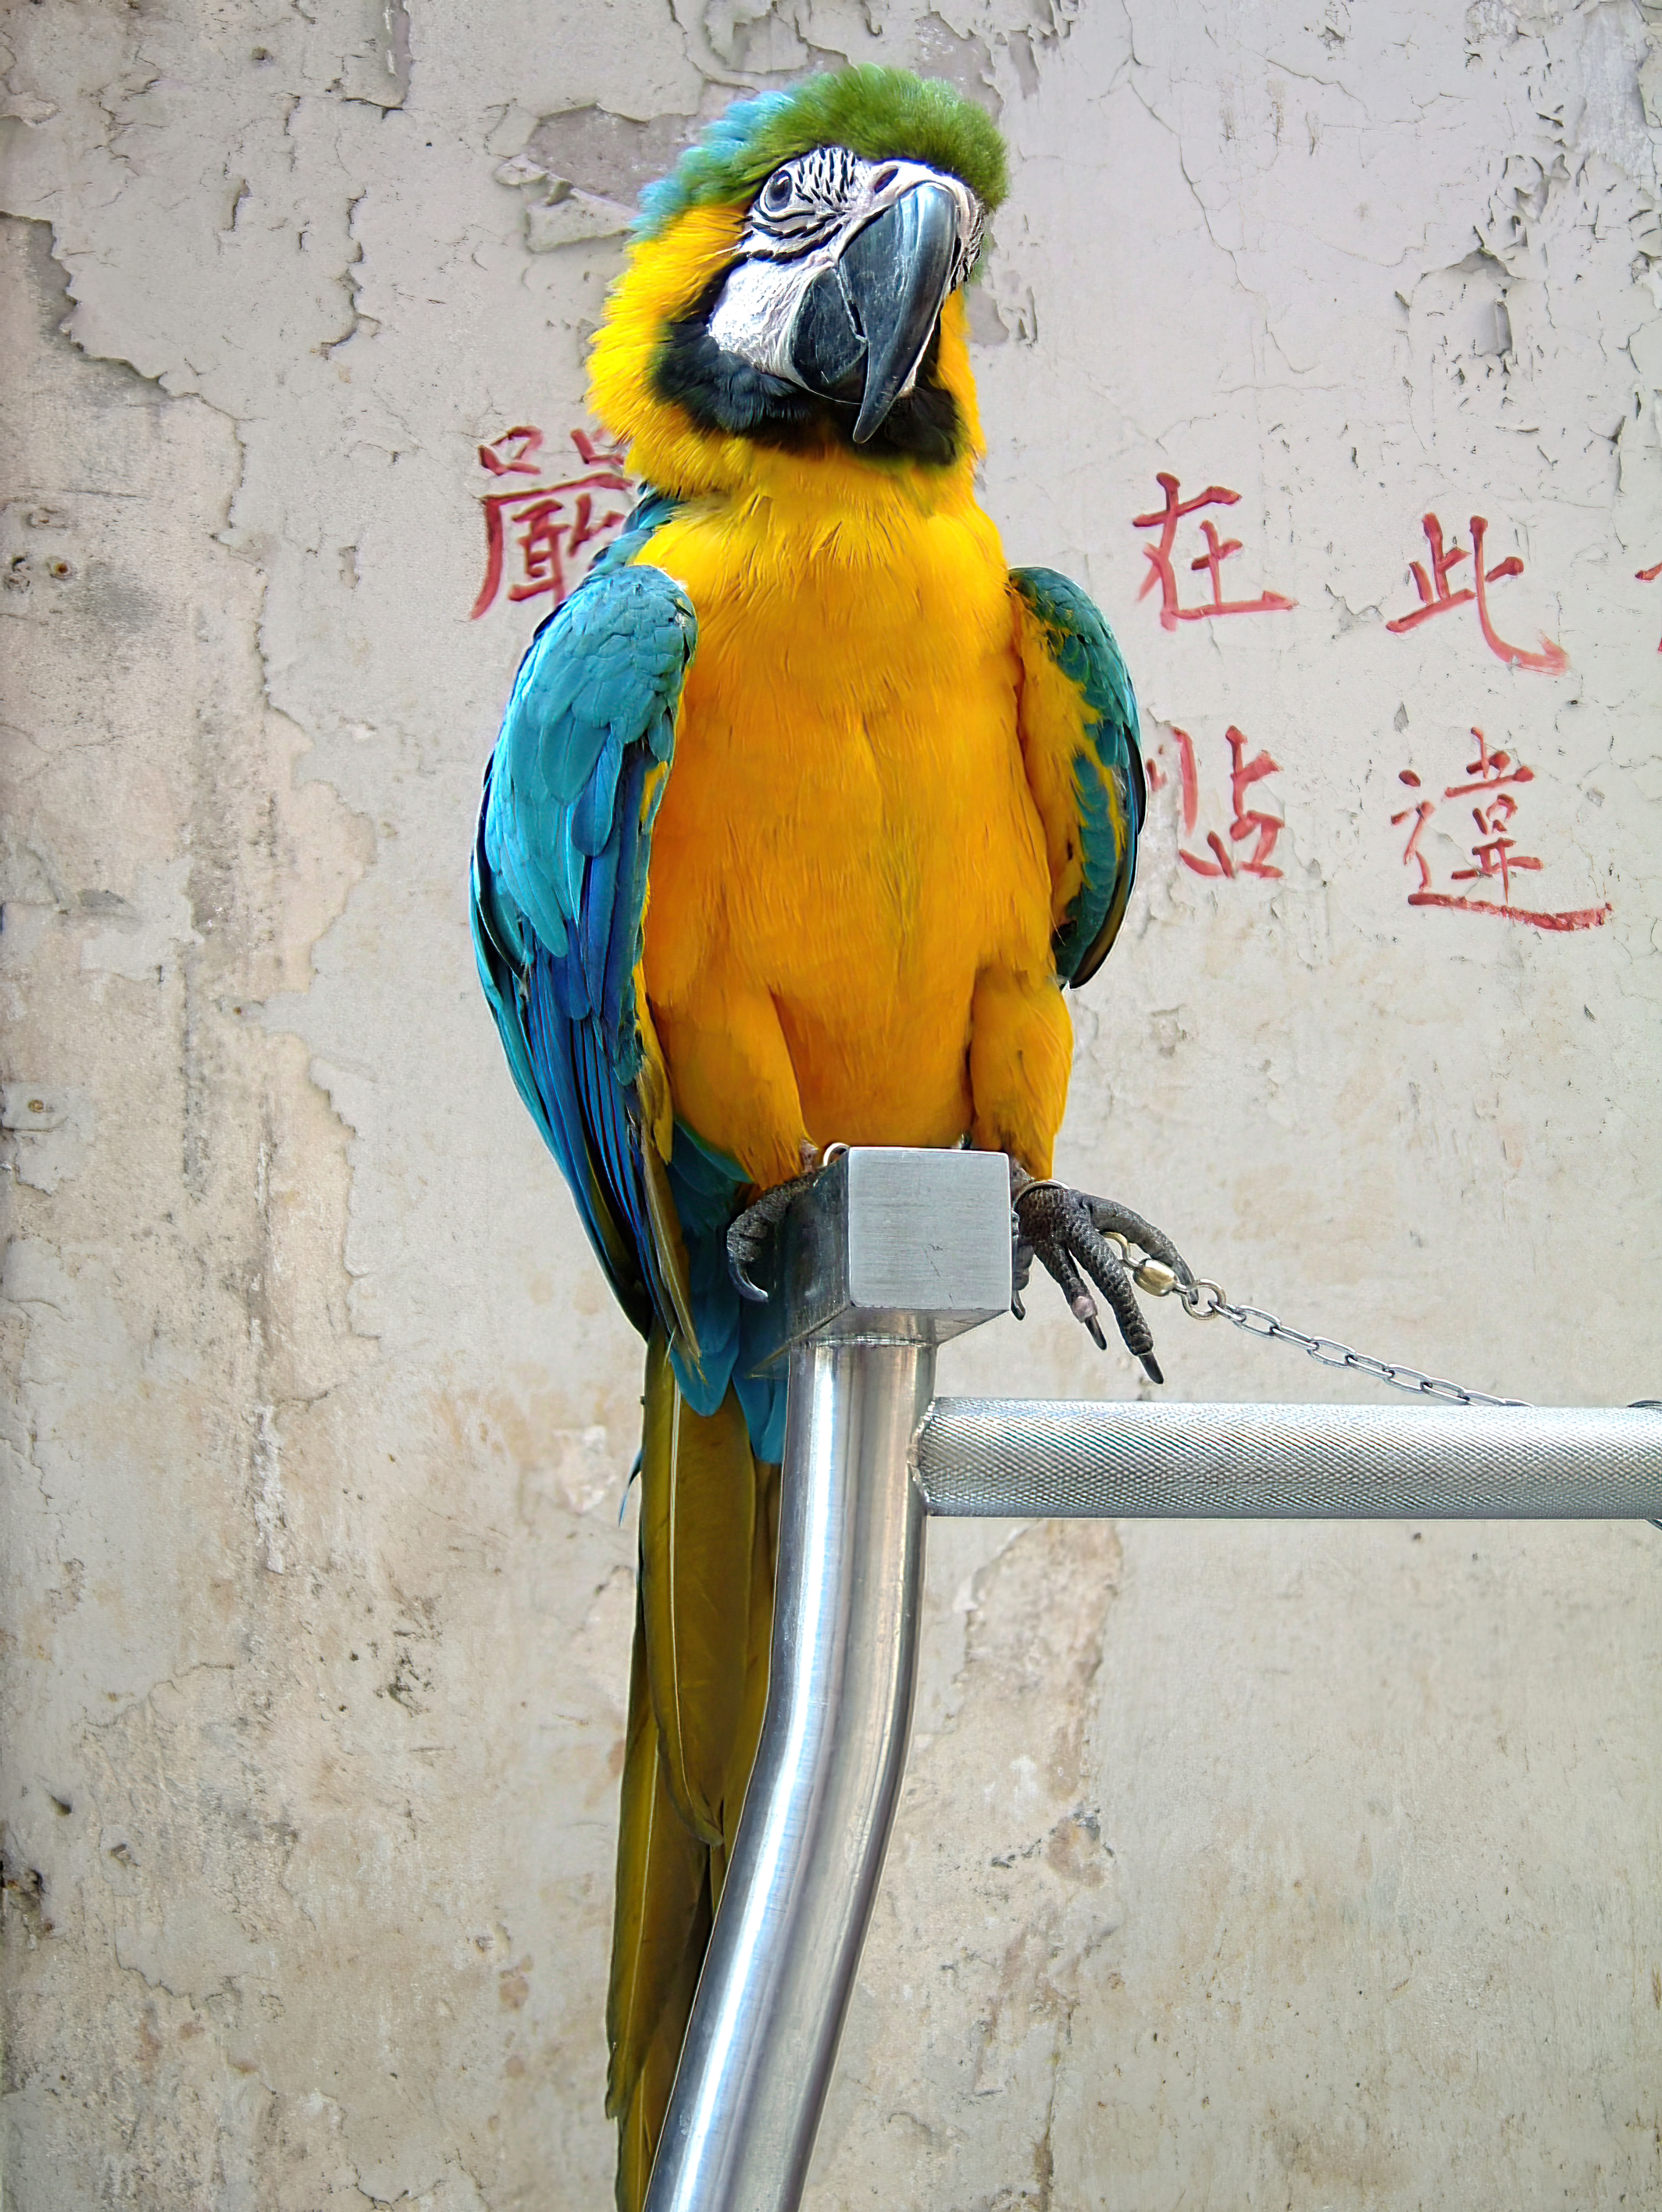 Wildlife birds slavery comes in many different forms Hong Kong street scenes Oct 2003